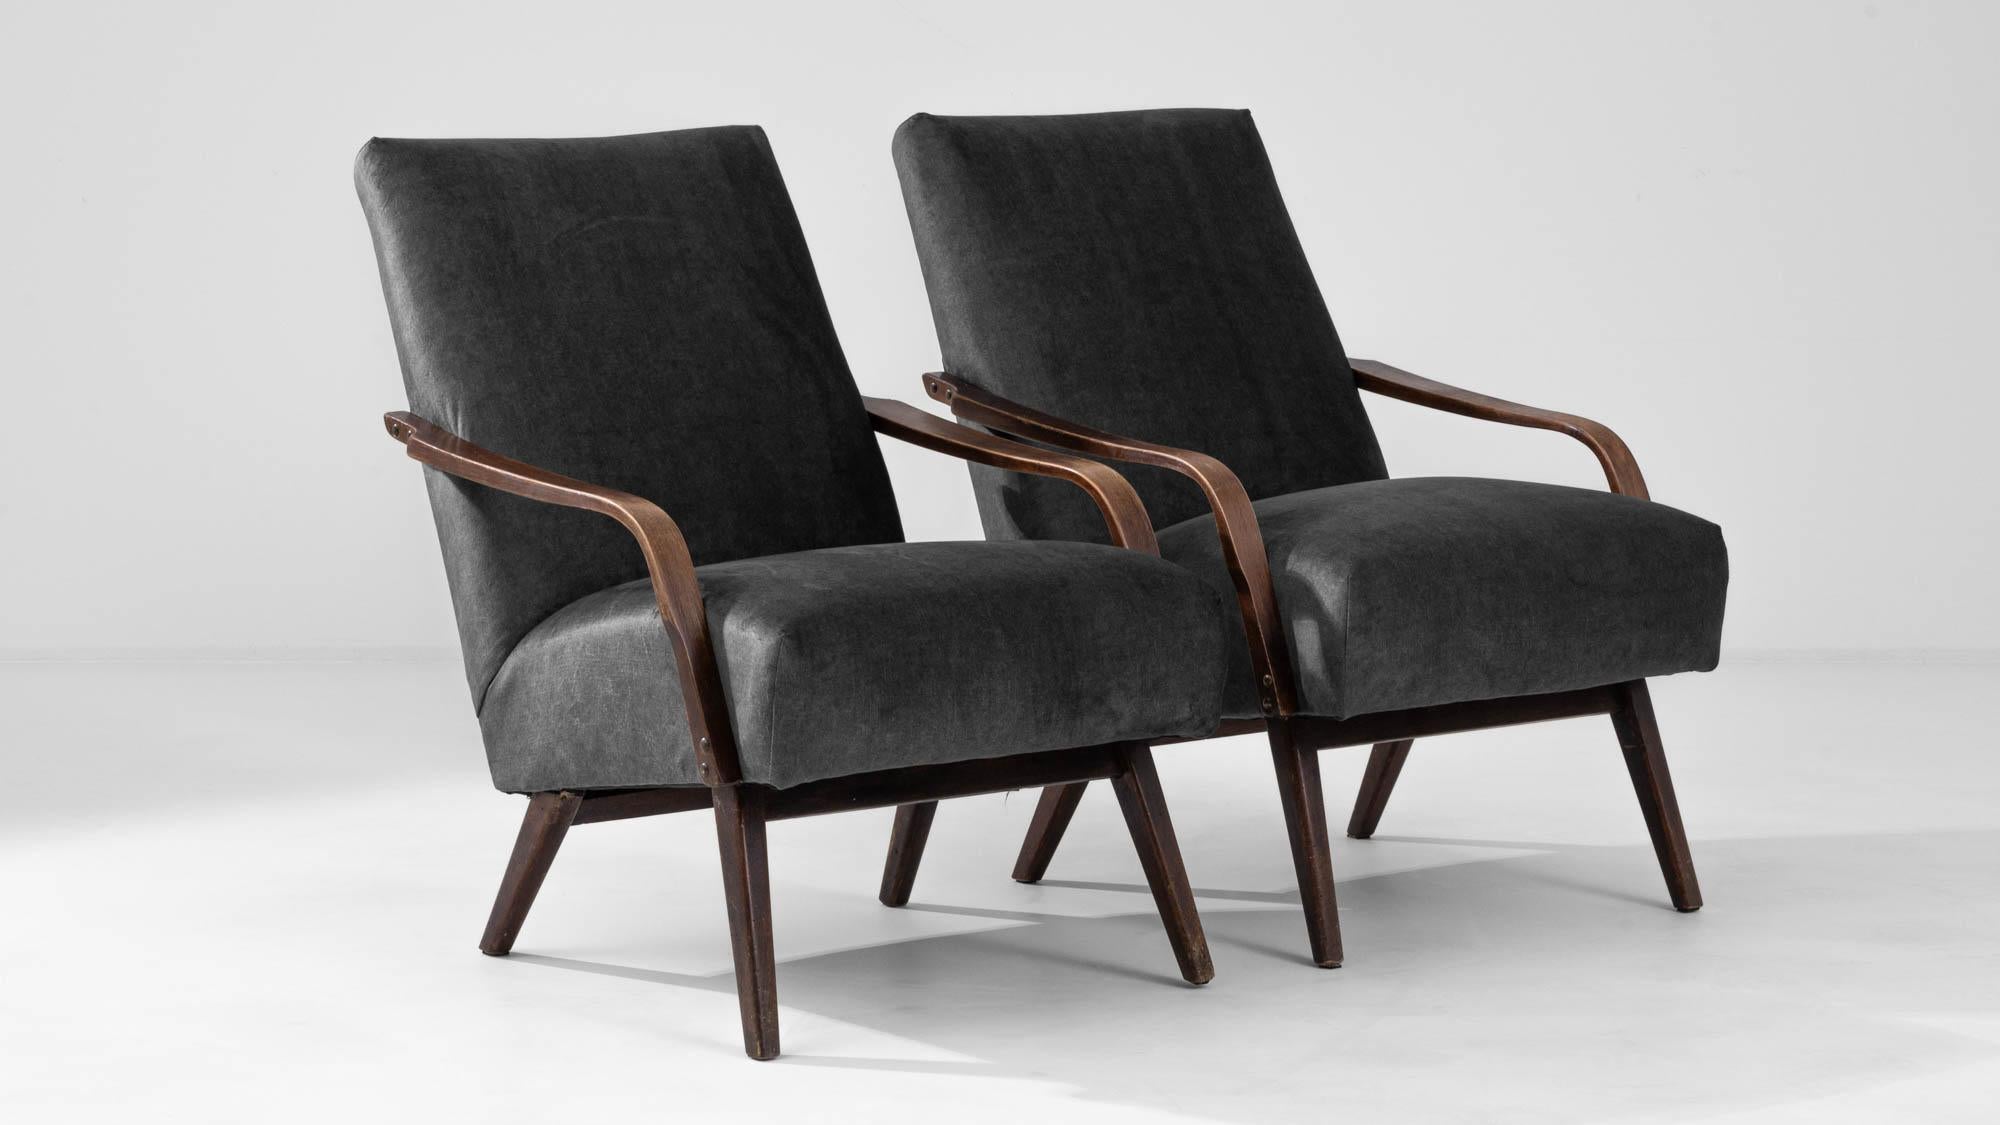 1960s Czech Upholstered Armchairs By TON, a Pair For Sale 6